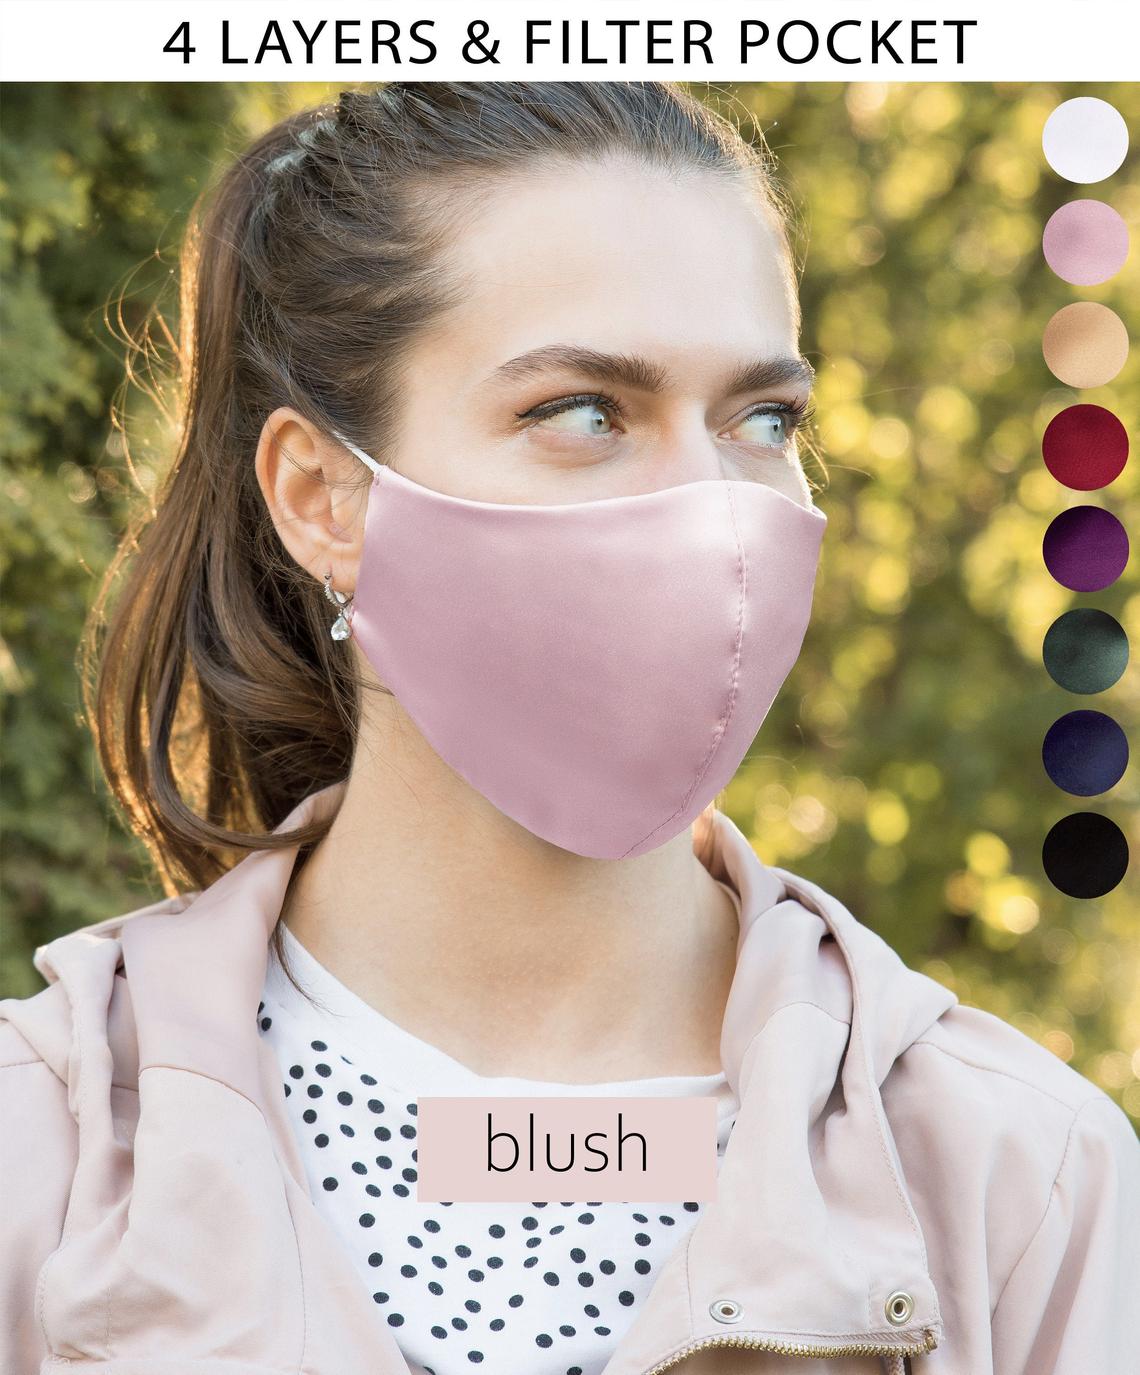 100% Silk Face Masks - USA Made - Adjustable Coverings - Blush Pink - pm 2.5 filter included